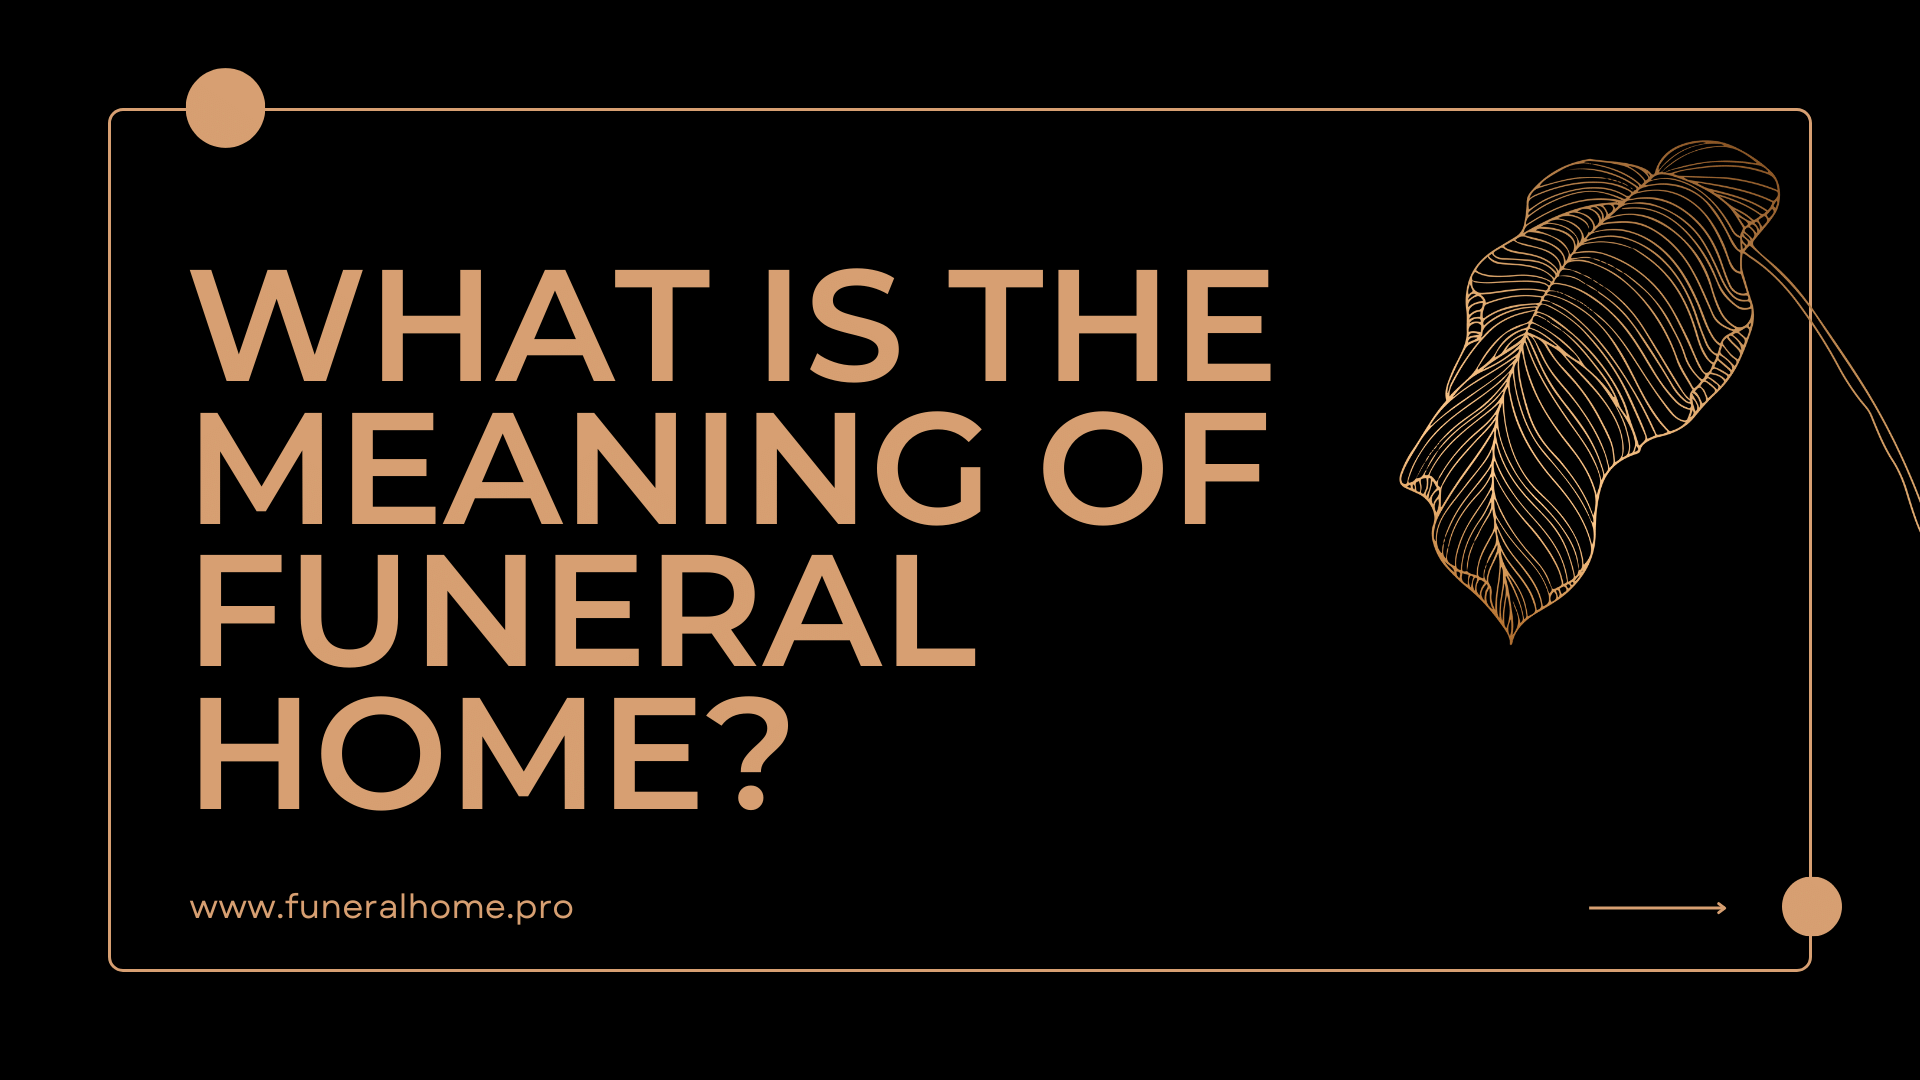 Funeral Home: What is the Meaning of Funeral Home?